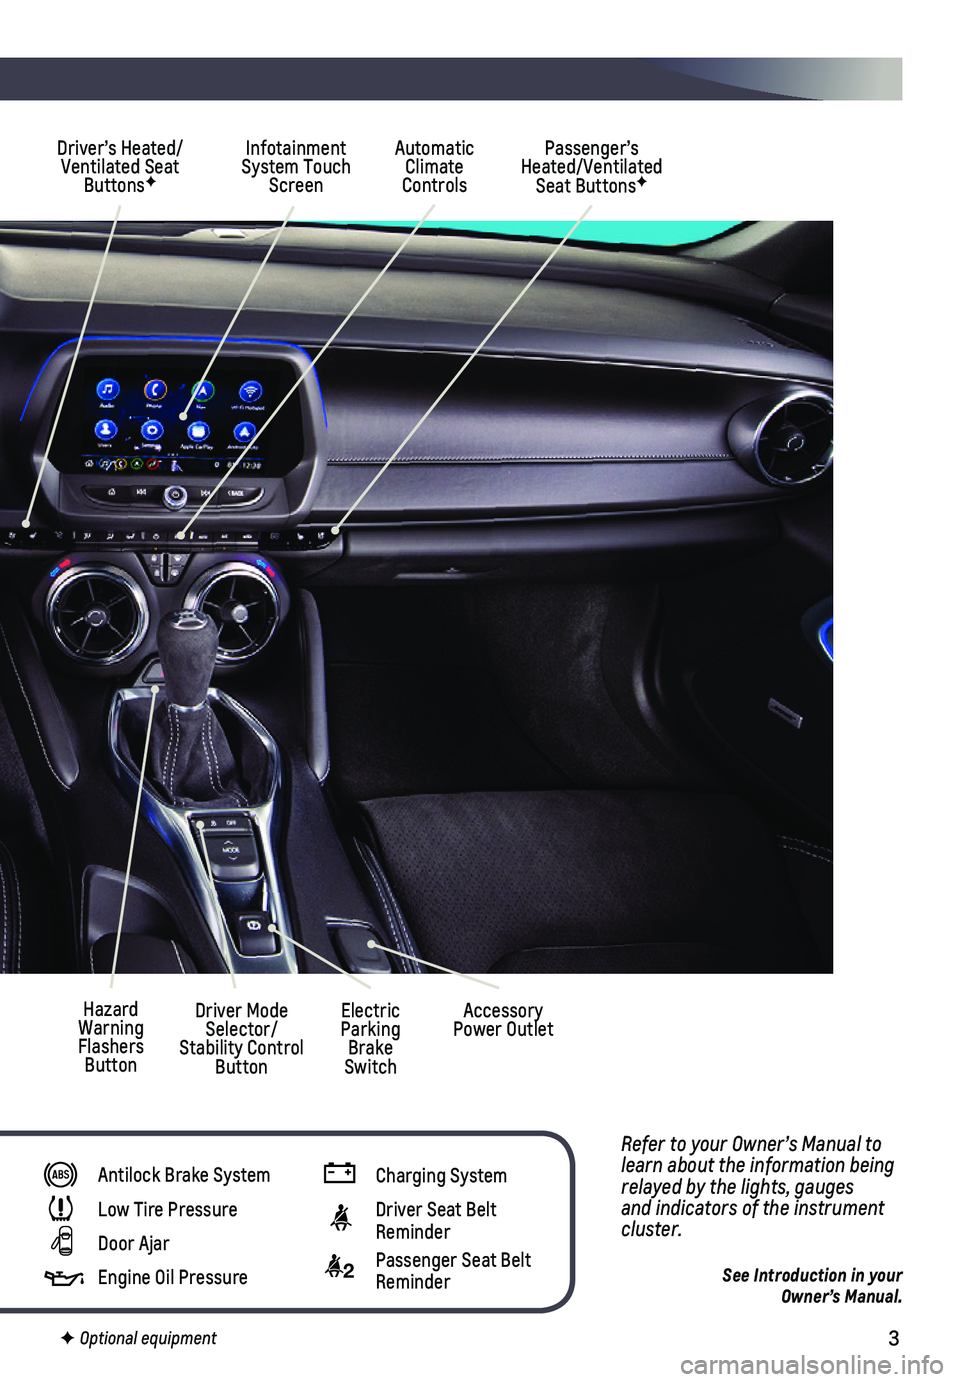 CHEVROLET CAMARO 2020  Owners Manual 3
Refer to your Owner’s Manual to learn about the information being relayed by the lights, gauges and indicators of the instrument cluster.
See Introduction in your  Owner’s Manual.
Driver’s Hea